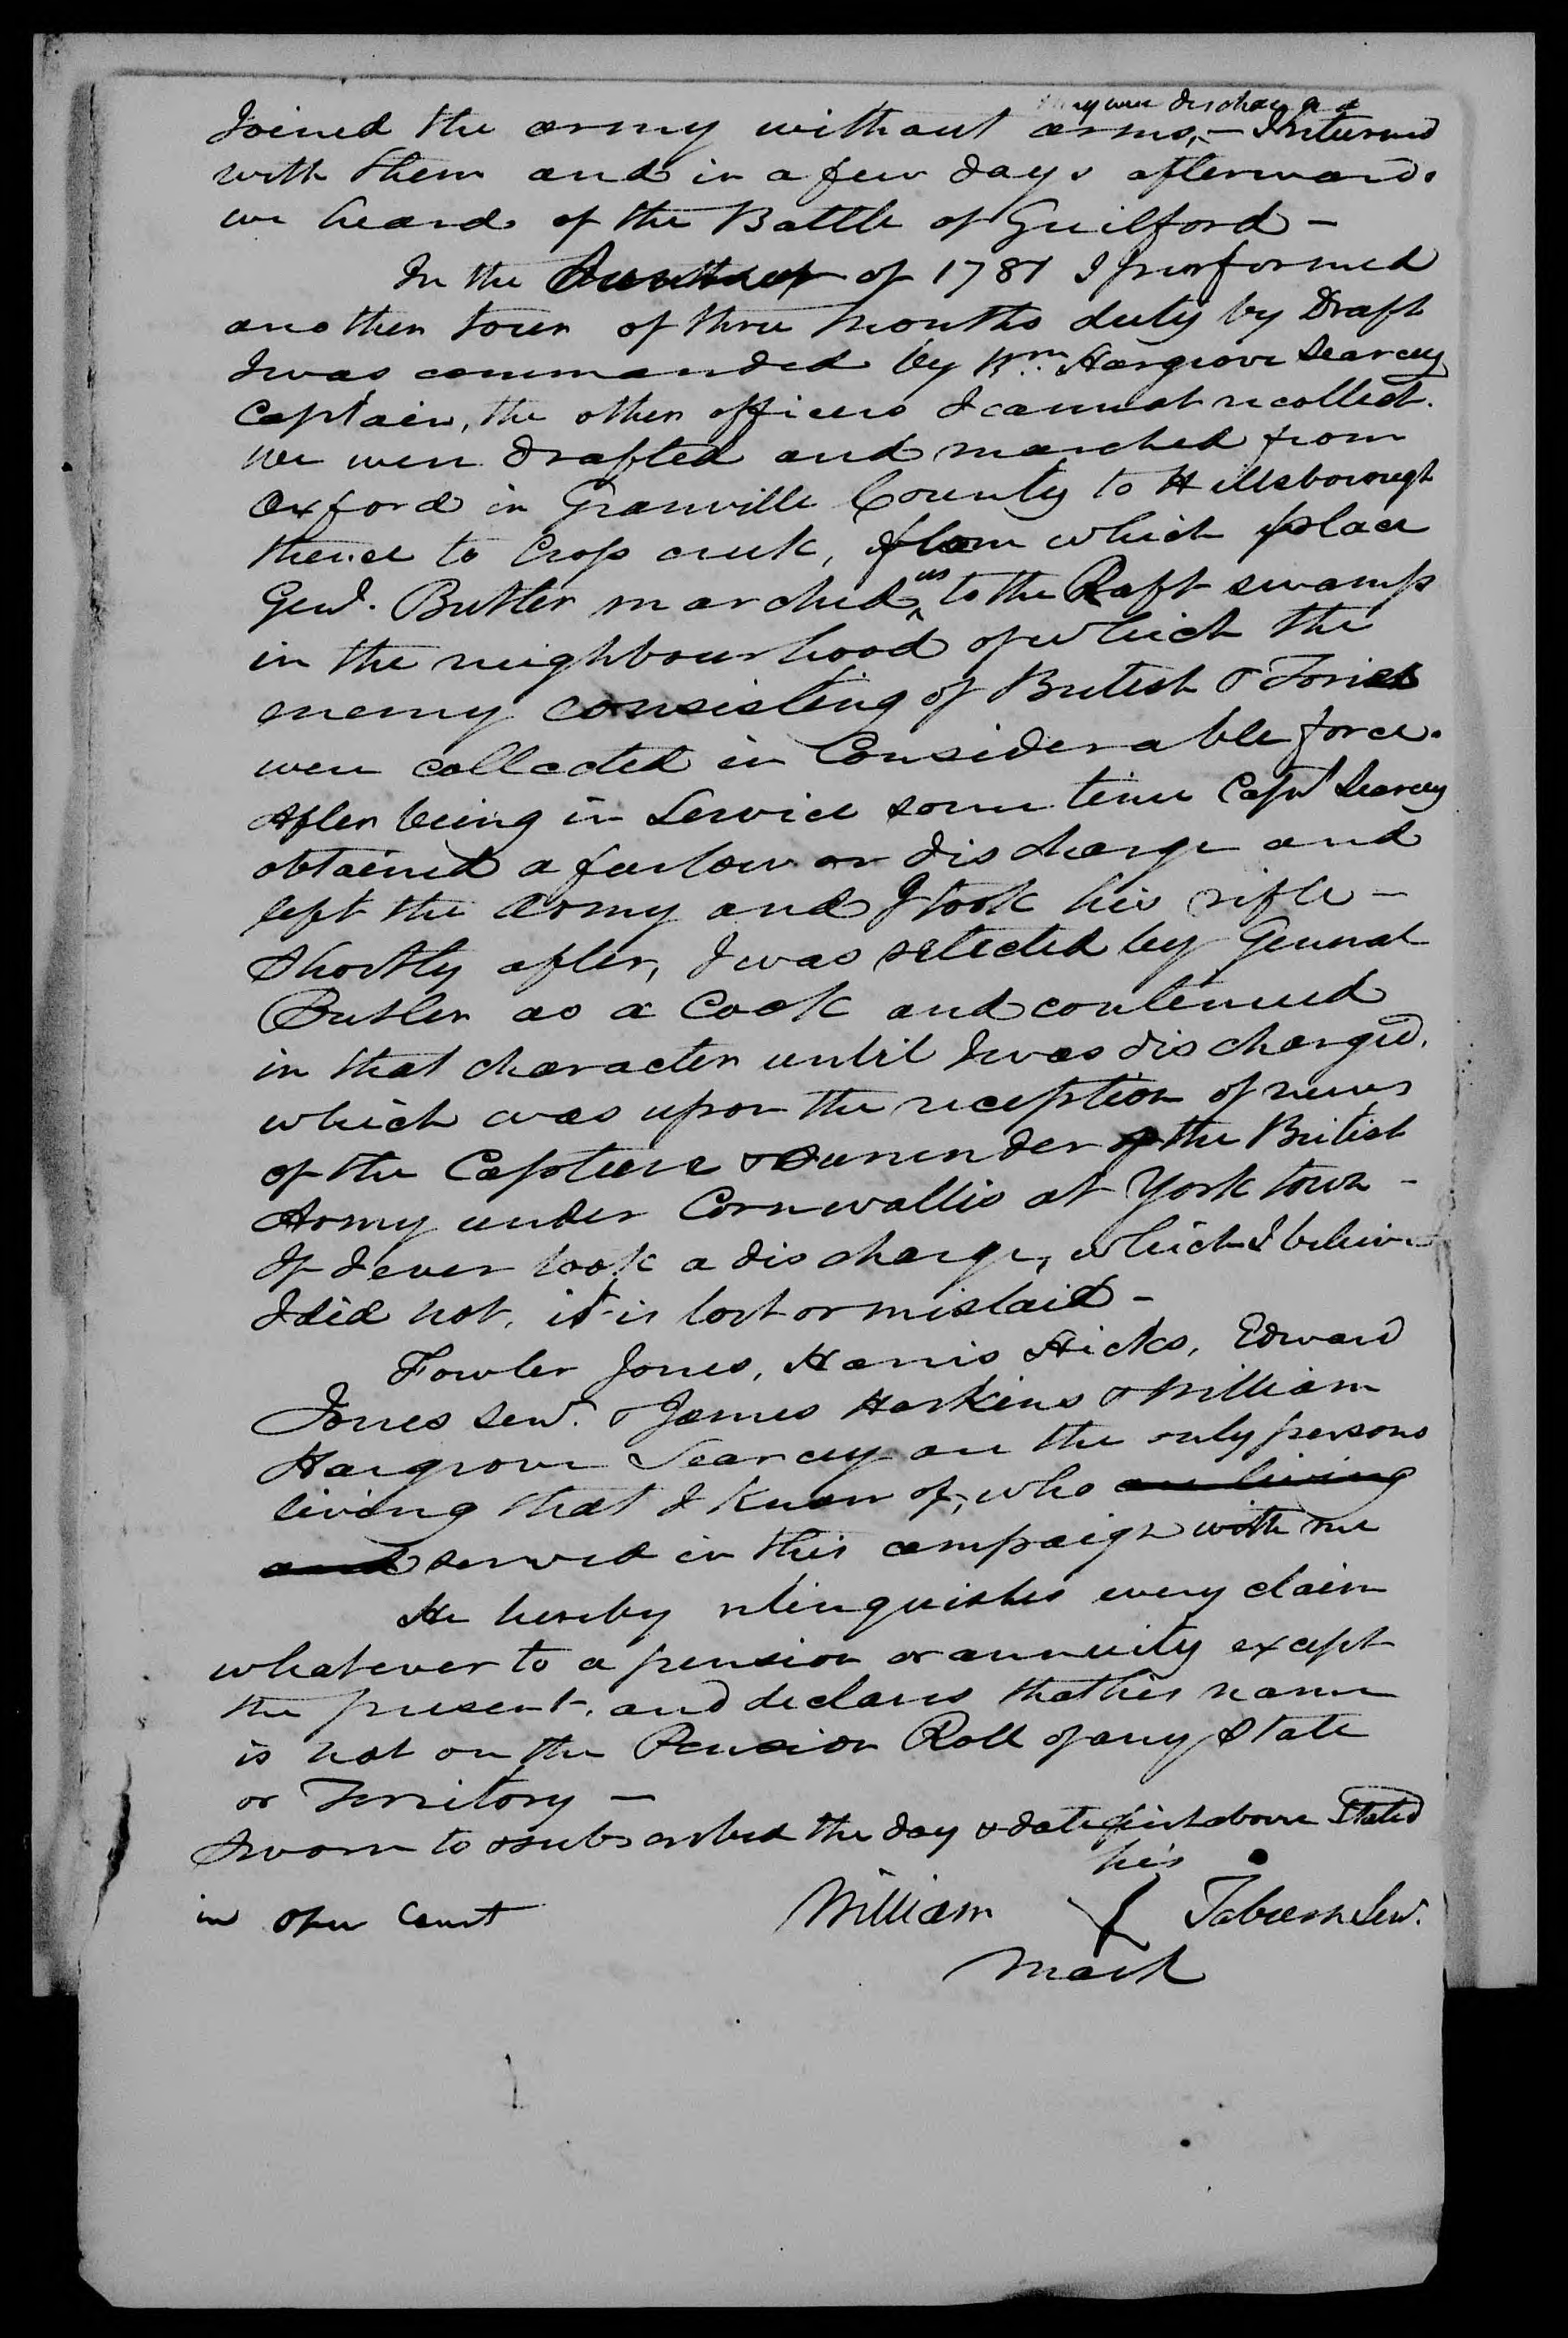 Application for a Veteran's Pension from William Taburn, 10 August 1832, page 5